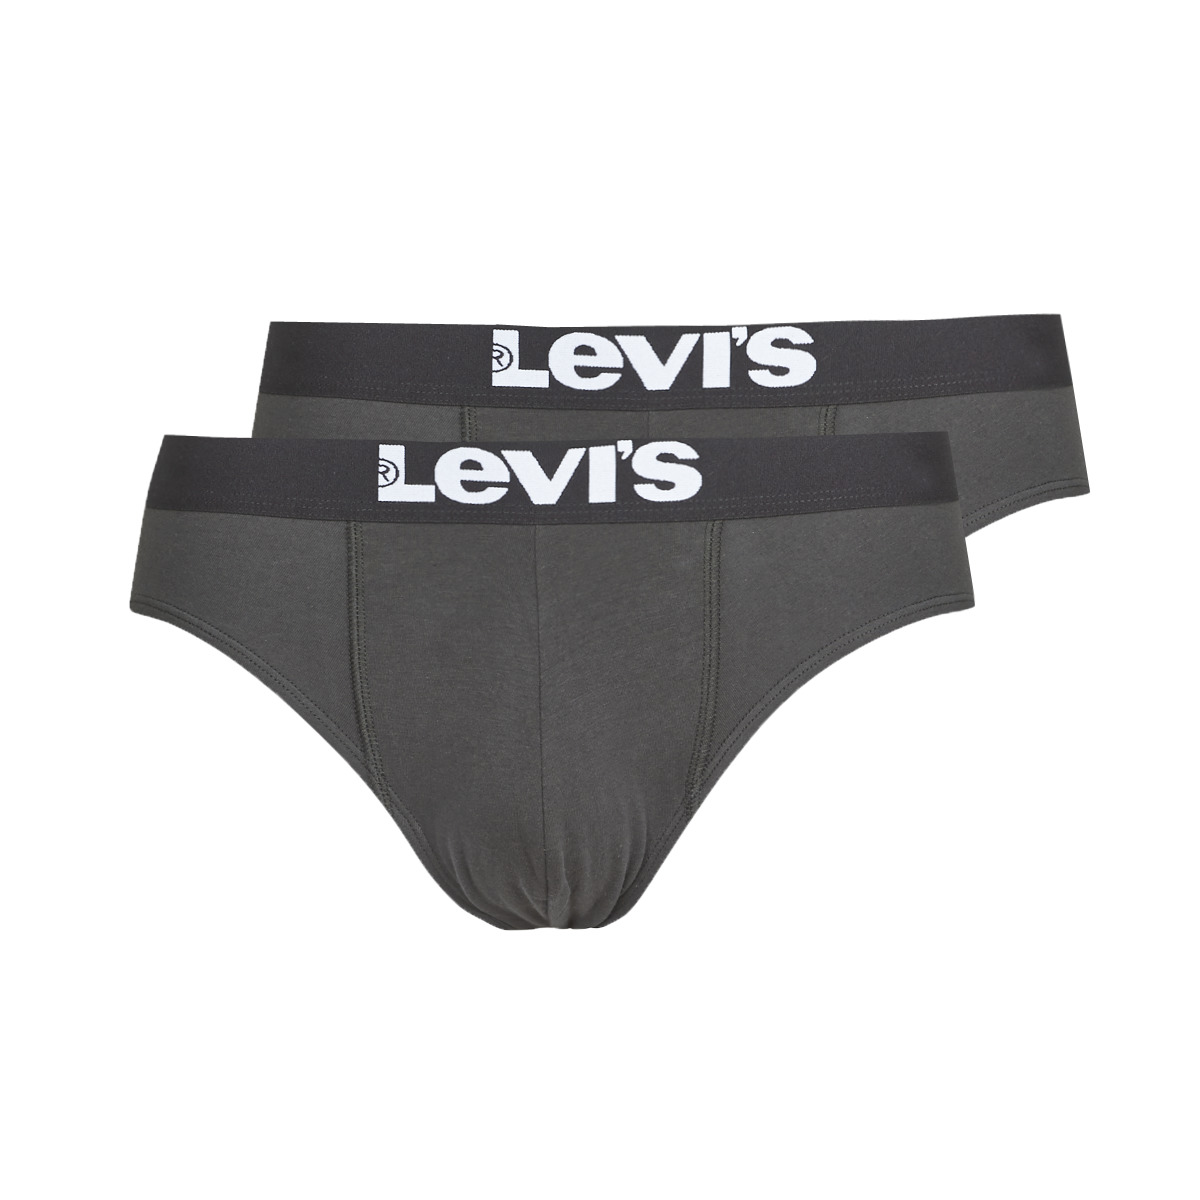 Levi's MEN SOLID BASIC PACK X2 Black - Fast delivery | Spartoo Europe ! -  Underwear Underpants / Brief Men 19,20 €